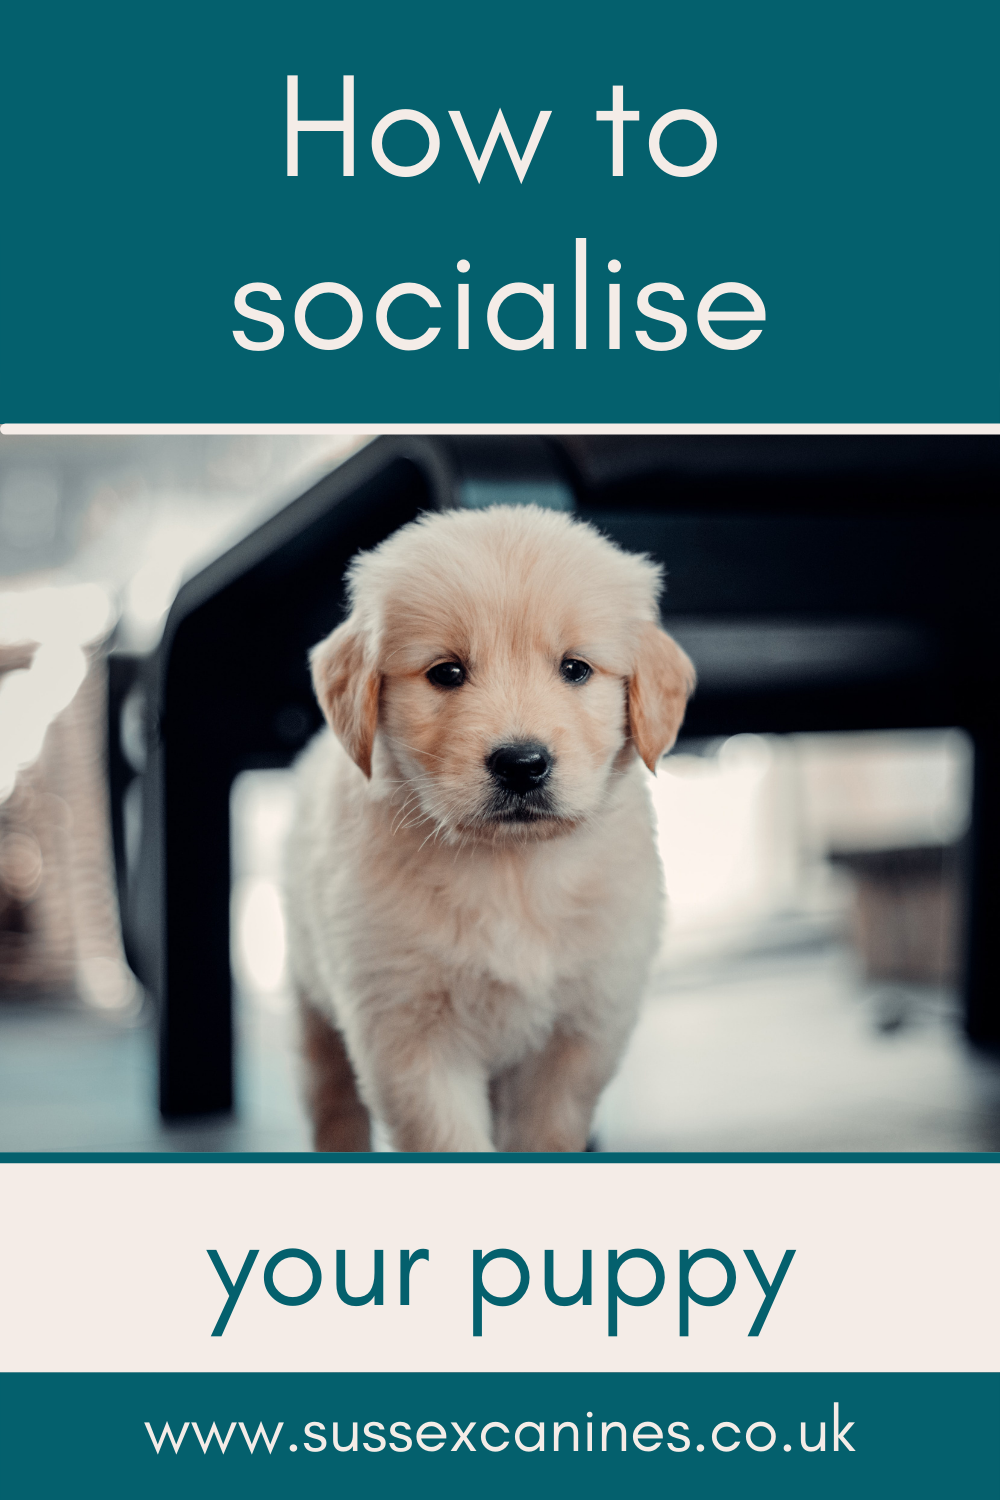 How to socialise your puppy